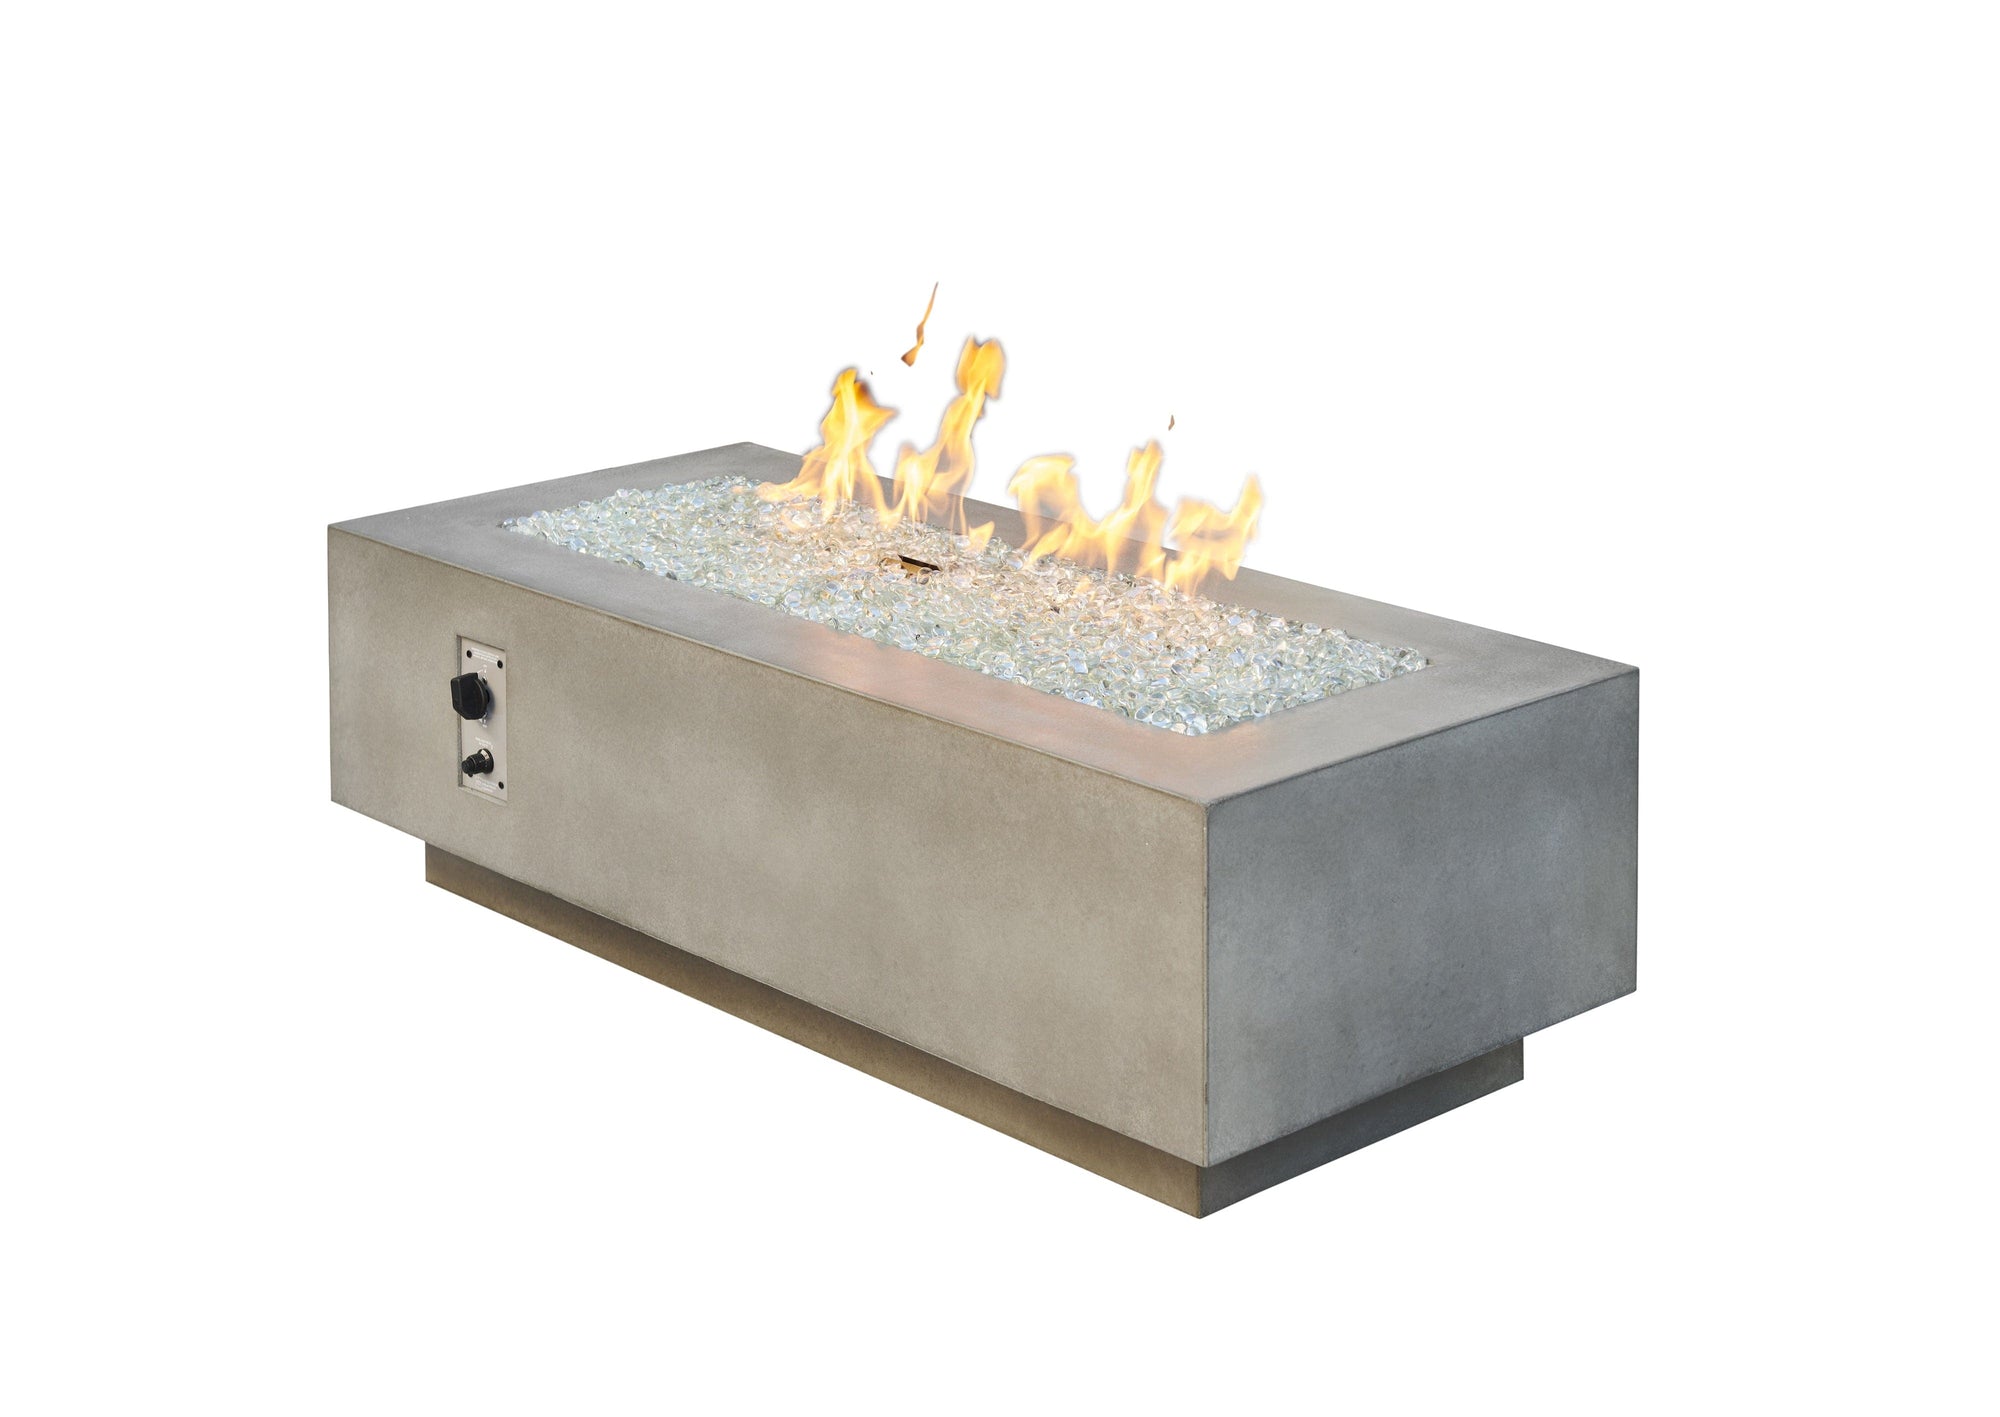 The Outdoor Great Room Fire Features The Outdoor GreatRoom Natural Grey, White, or Midnight Mist Supercast Cove 54" Linear Gas Fire Pit Table / CV-54, CV-54MM, CV-54WT